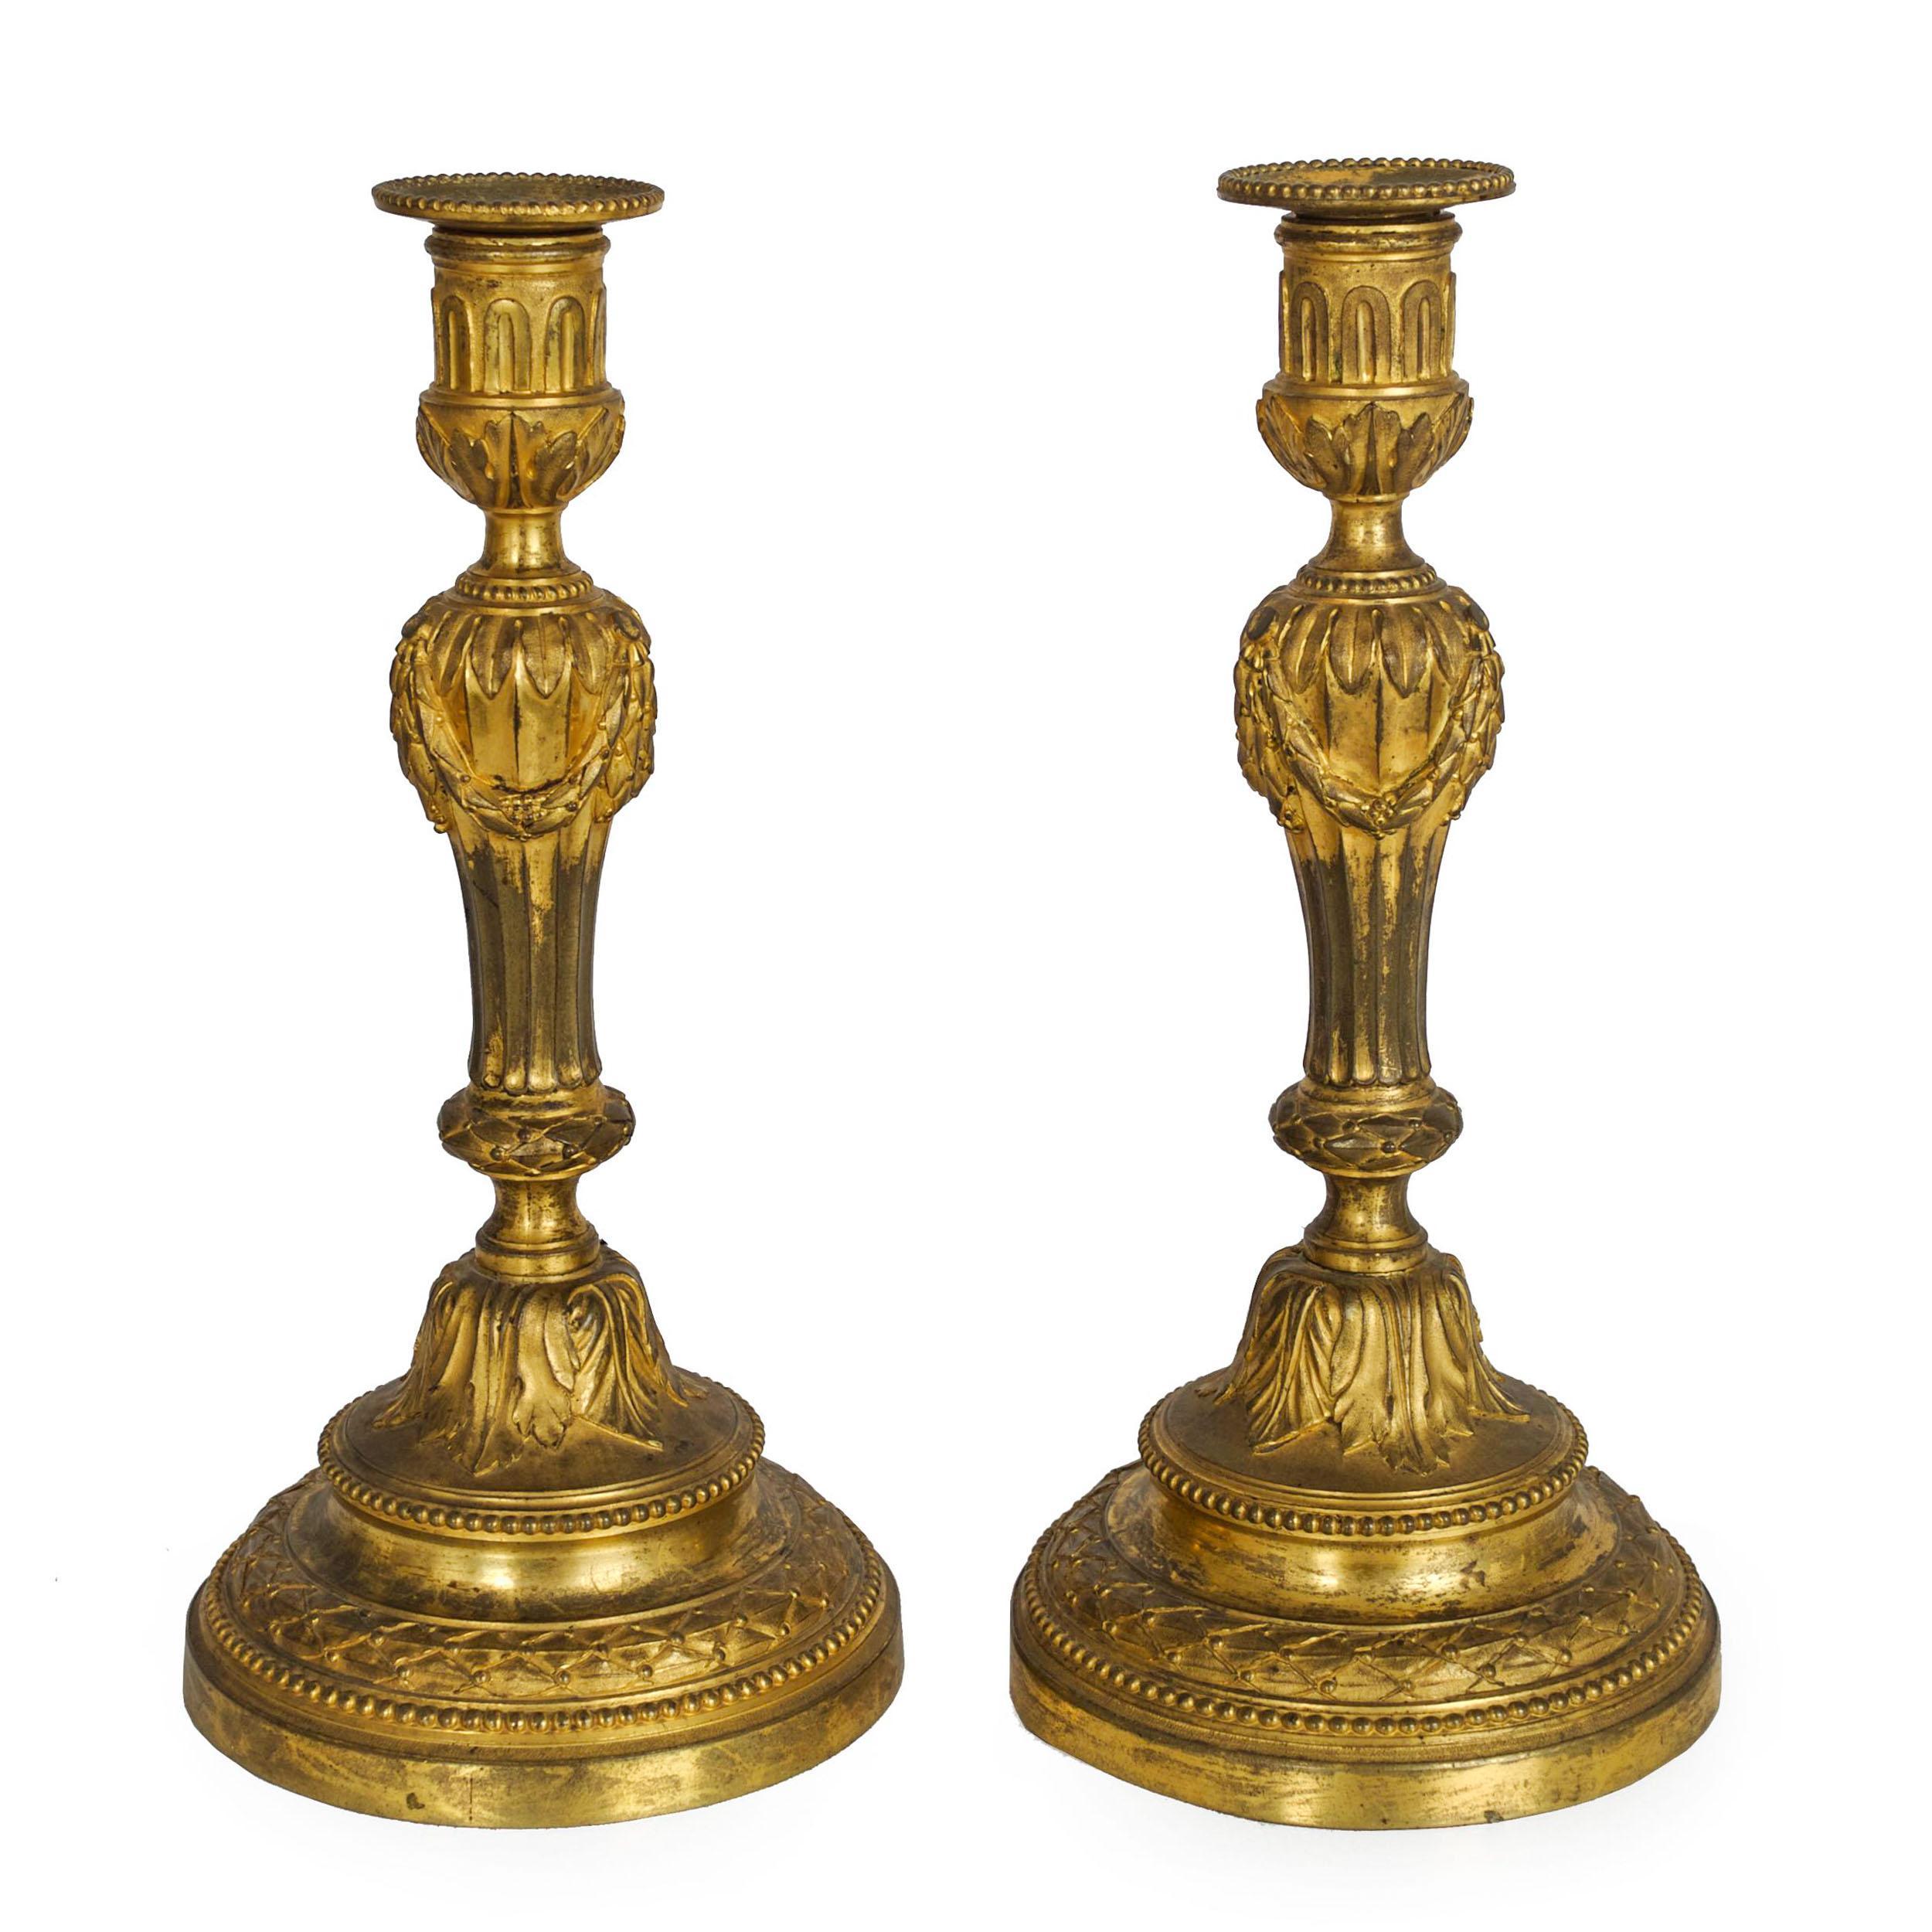 Rare Pair of Louis XVI Period Ormolu Candlesticks, France, circa 1770
Item # C1040271

An incredibly fine pair of ormolu bronze candlesticks from the Wildenstein Collection, they feature a fluted baluster stem draped with fruiting garlands around